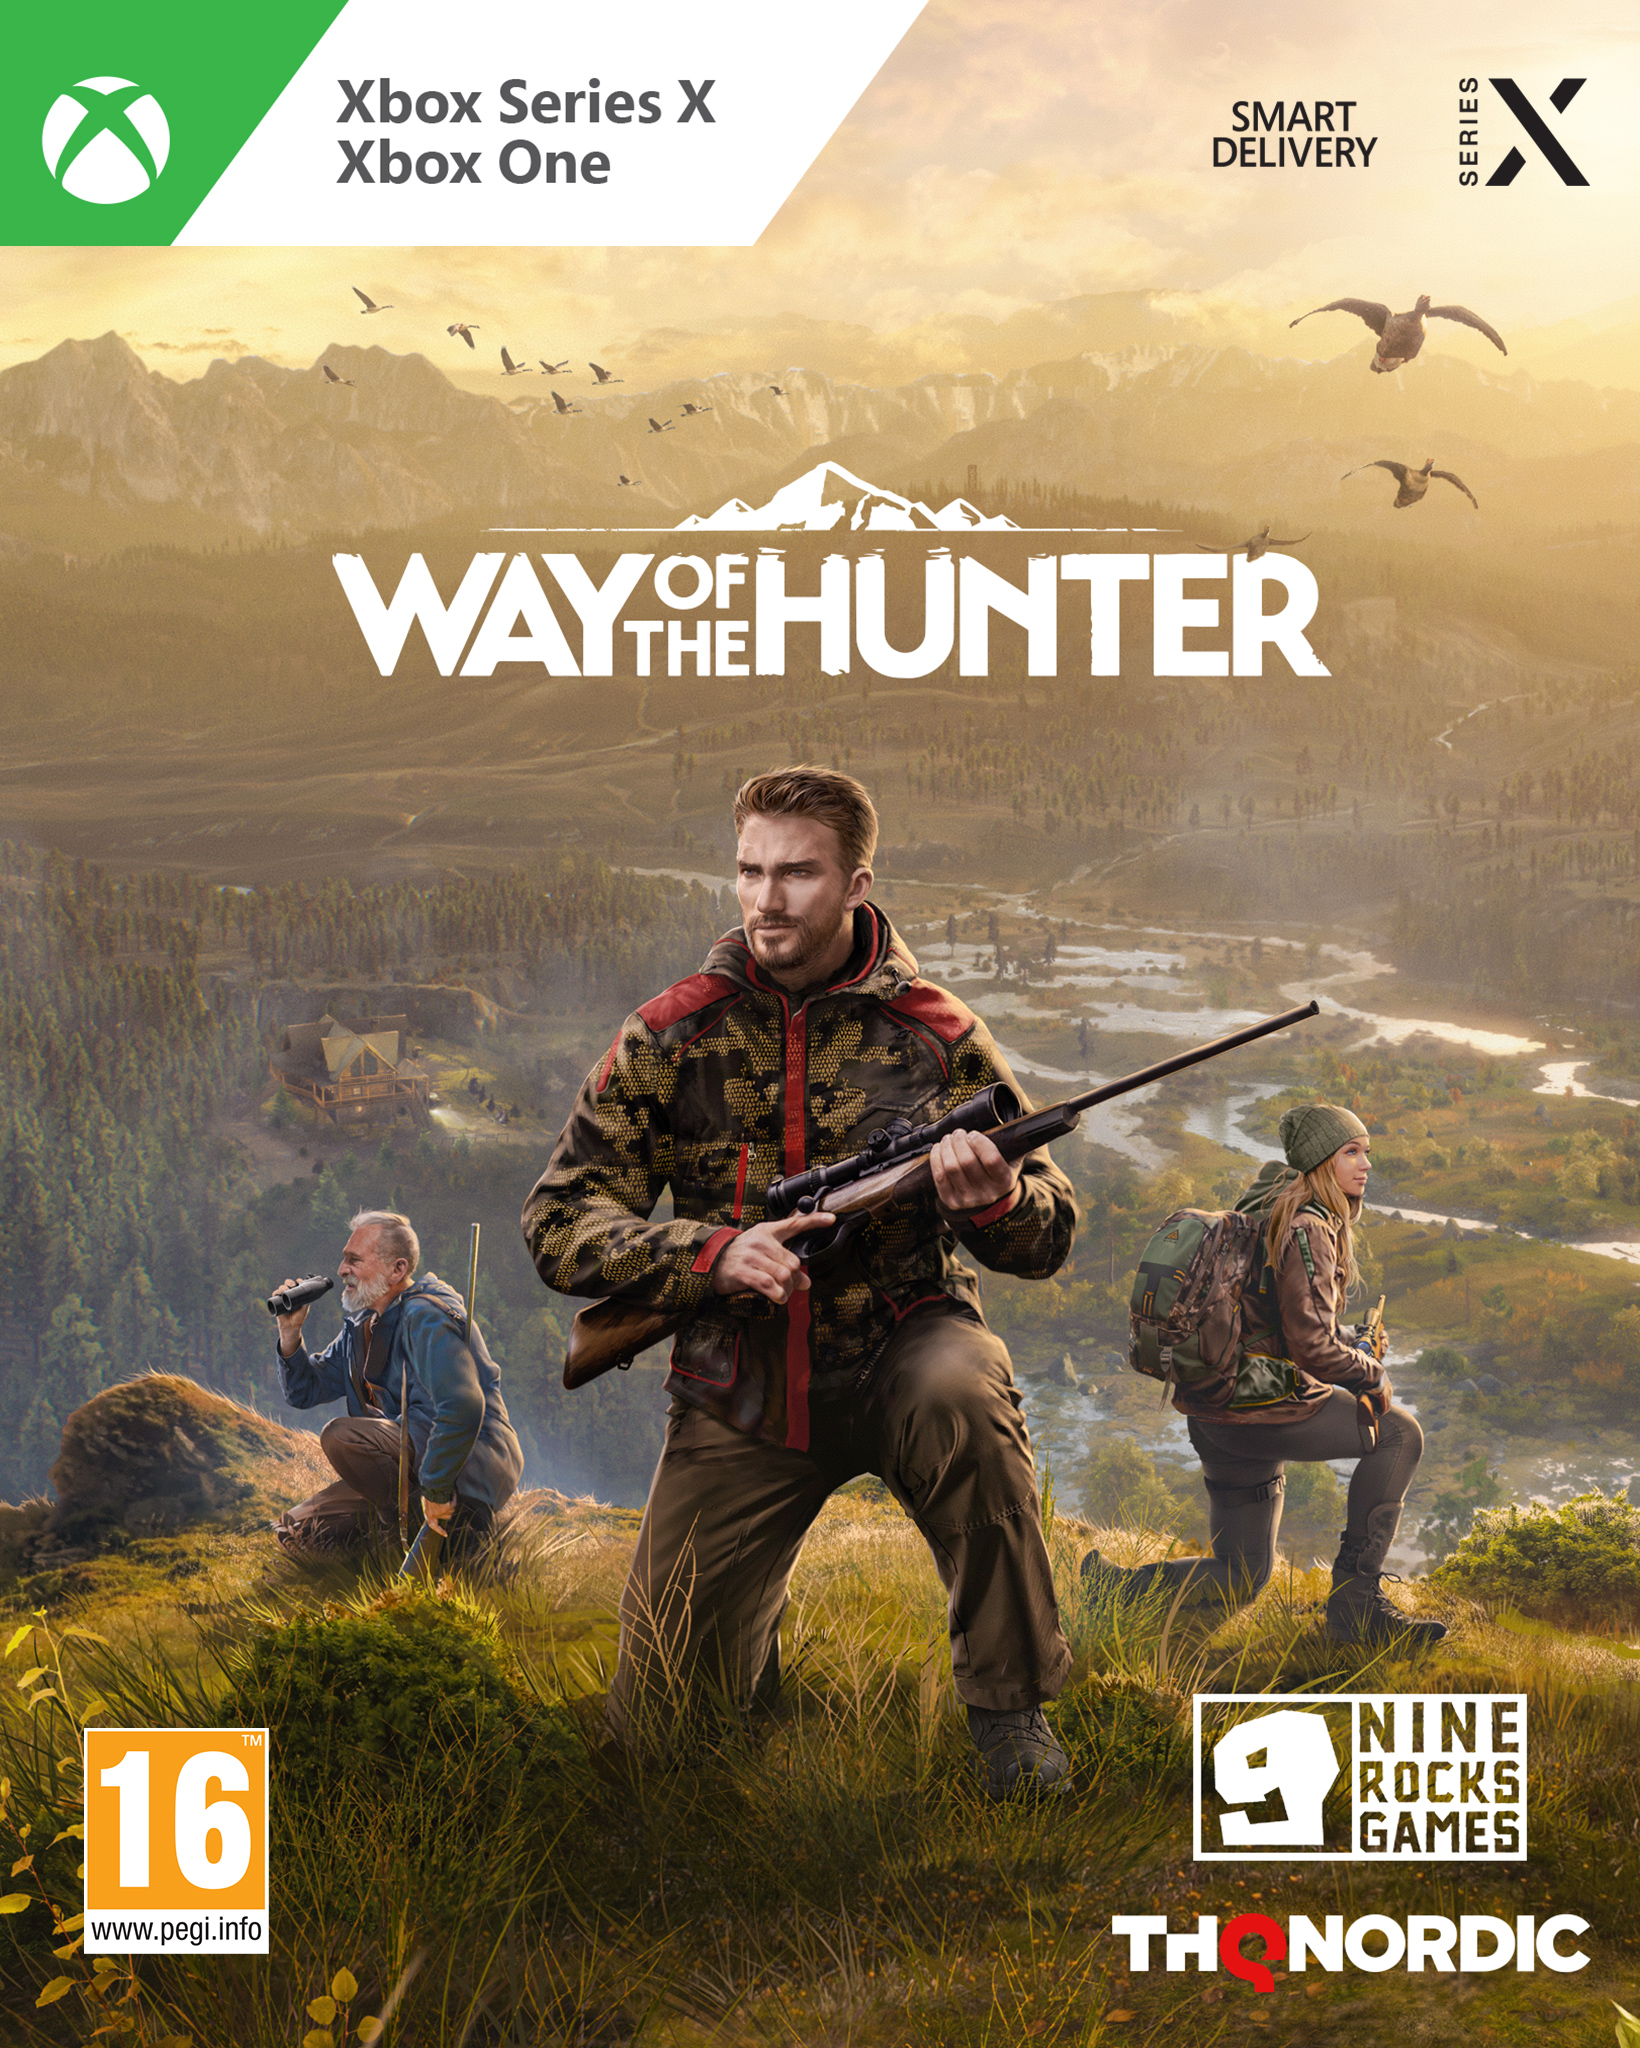 theHunter: 2019 Game of the Year Edition, THQ-Nordic, PlayStation 4,  811994021670 